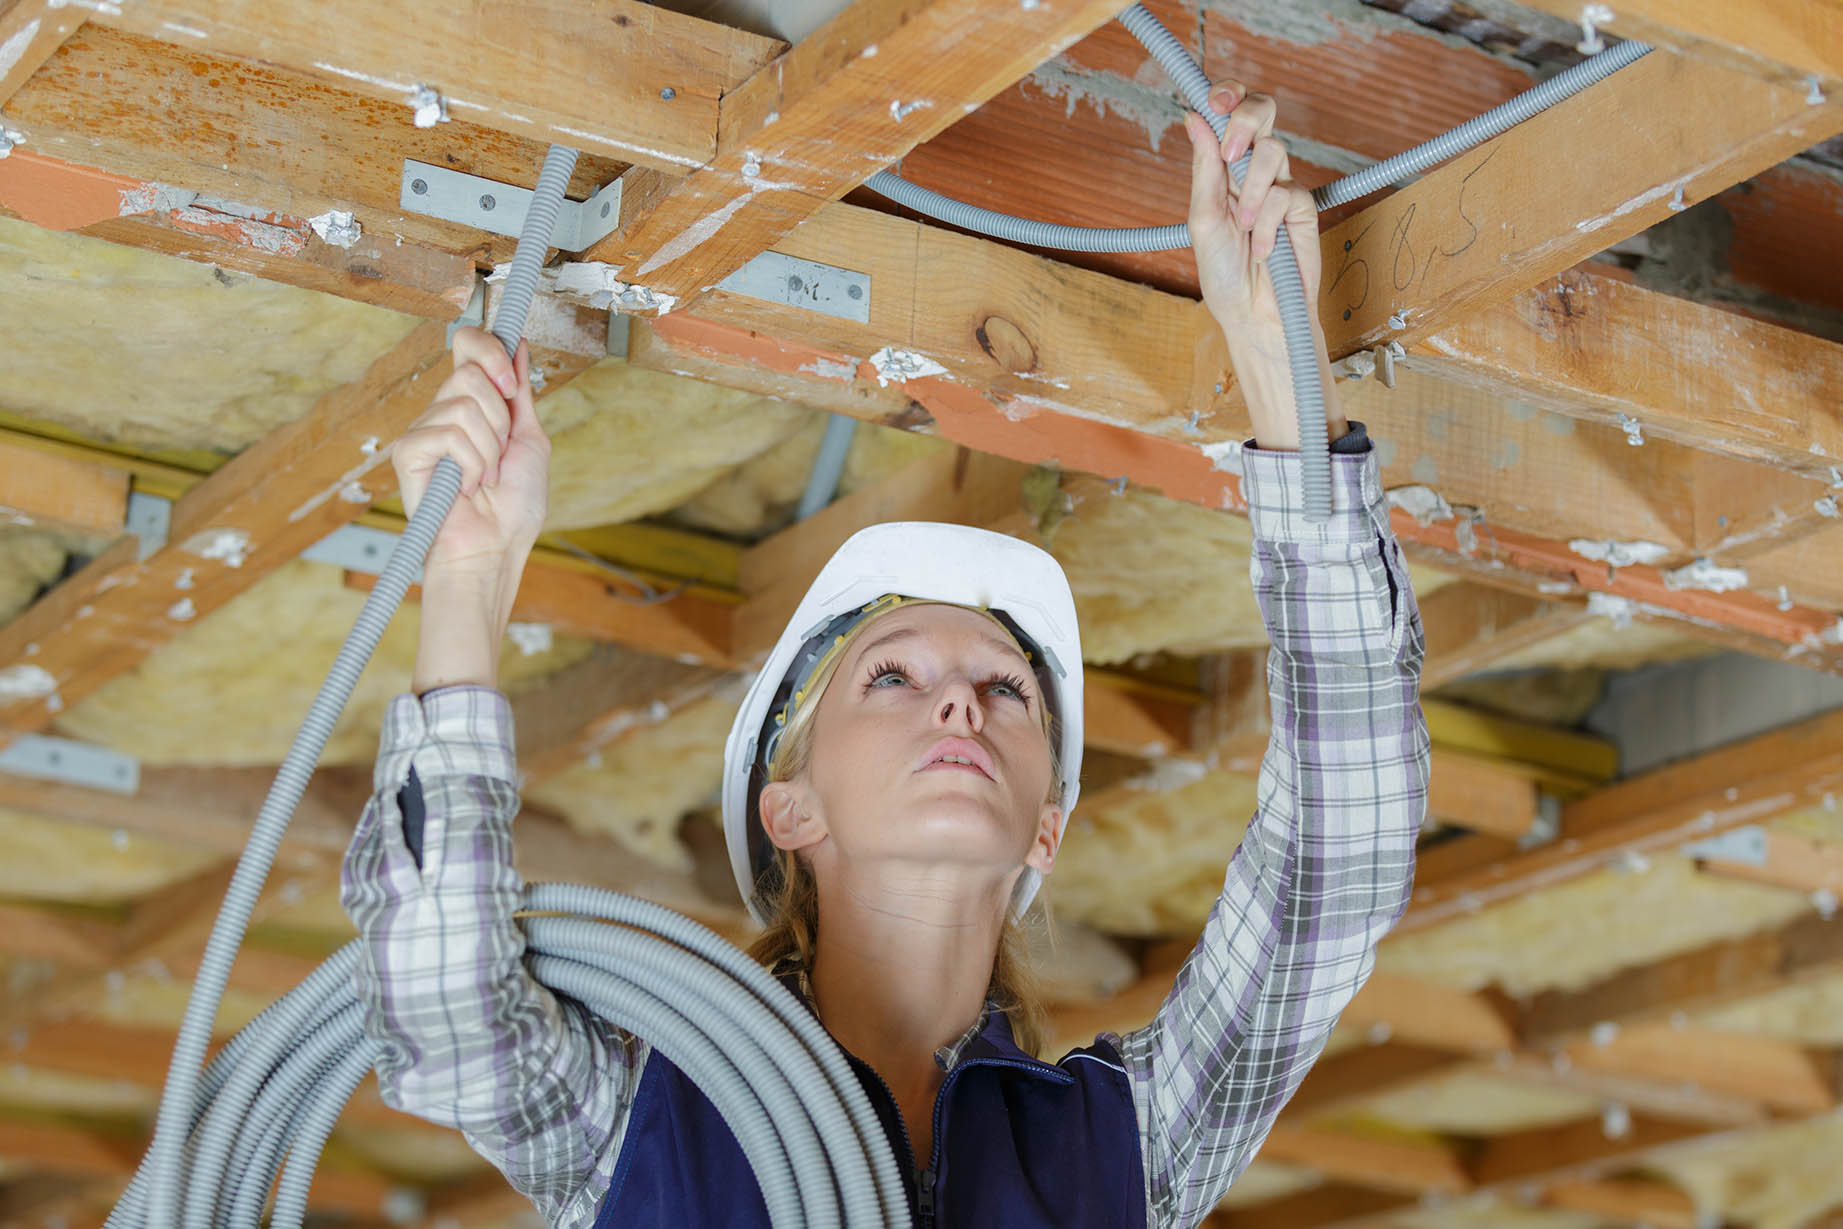 A picture of a woman installing cabling in a basement